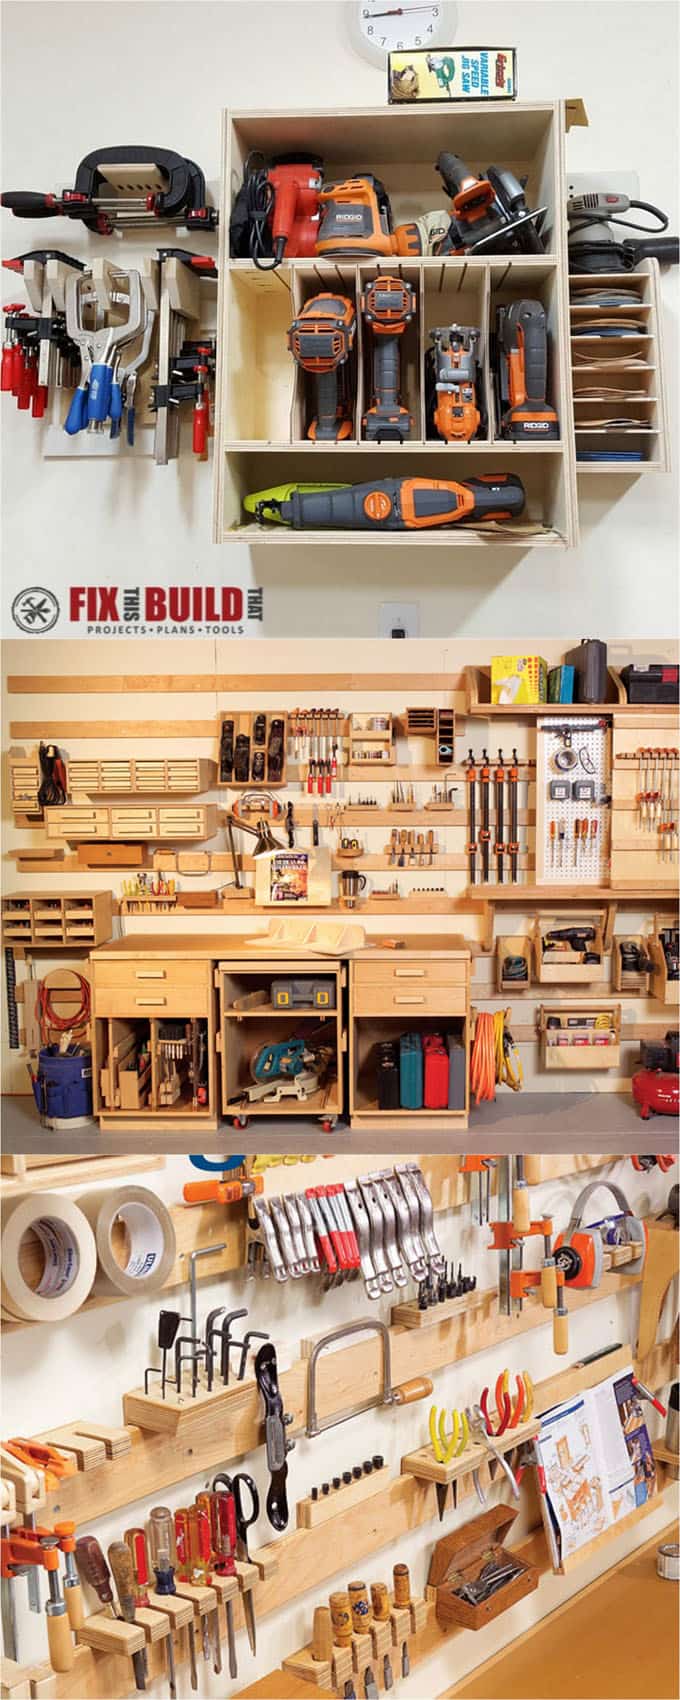 21 Great Ways to Easily Organize Your Workshop and Craft Room - Page 2 ...